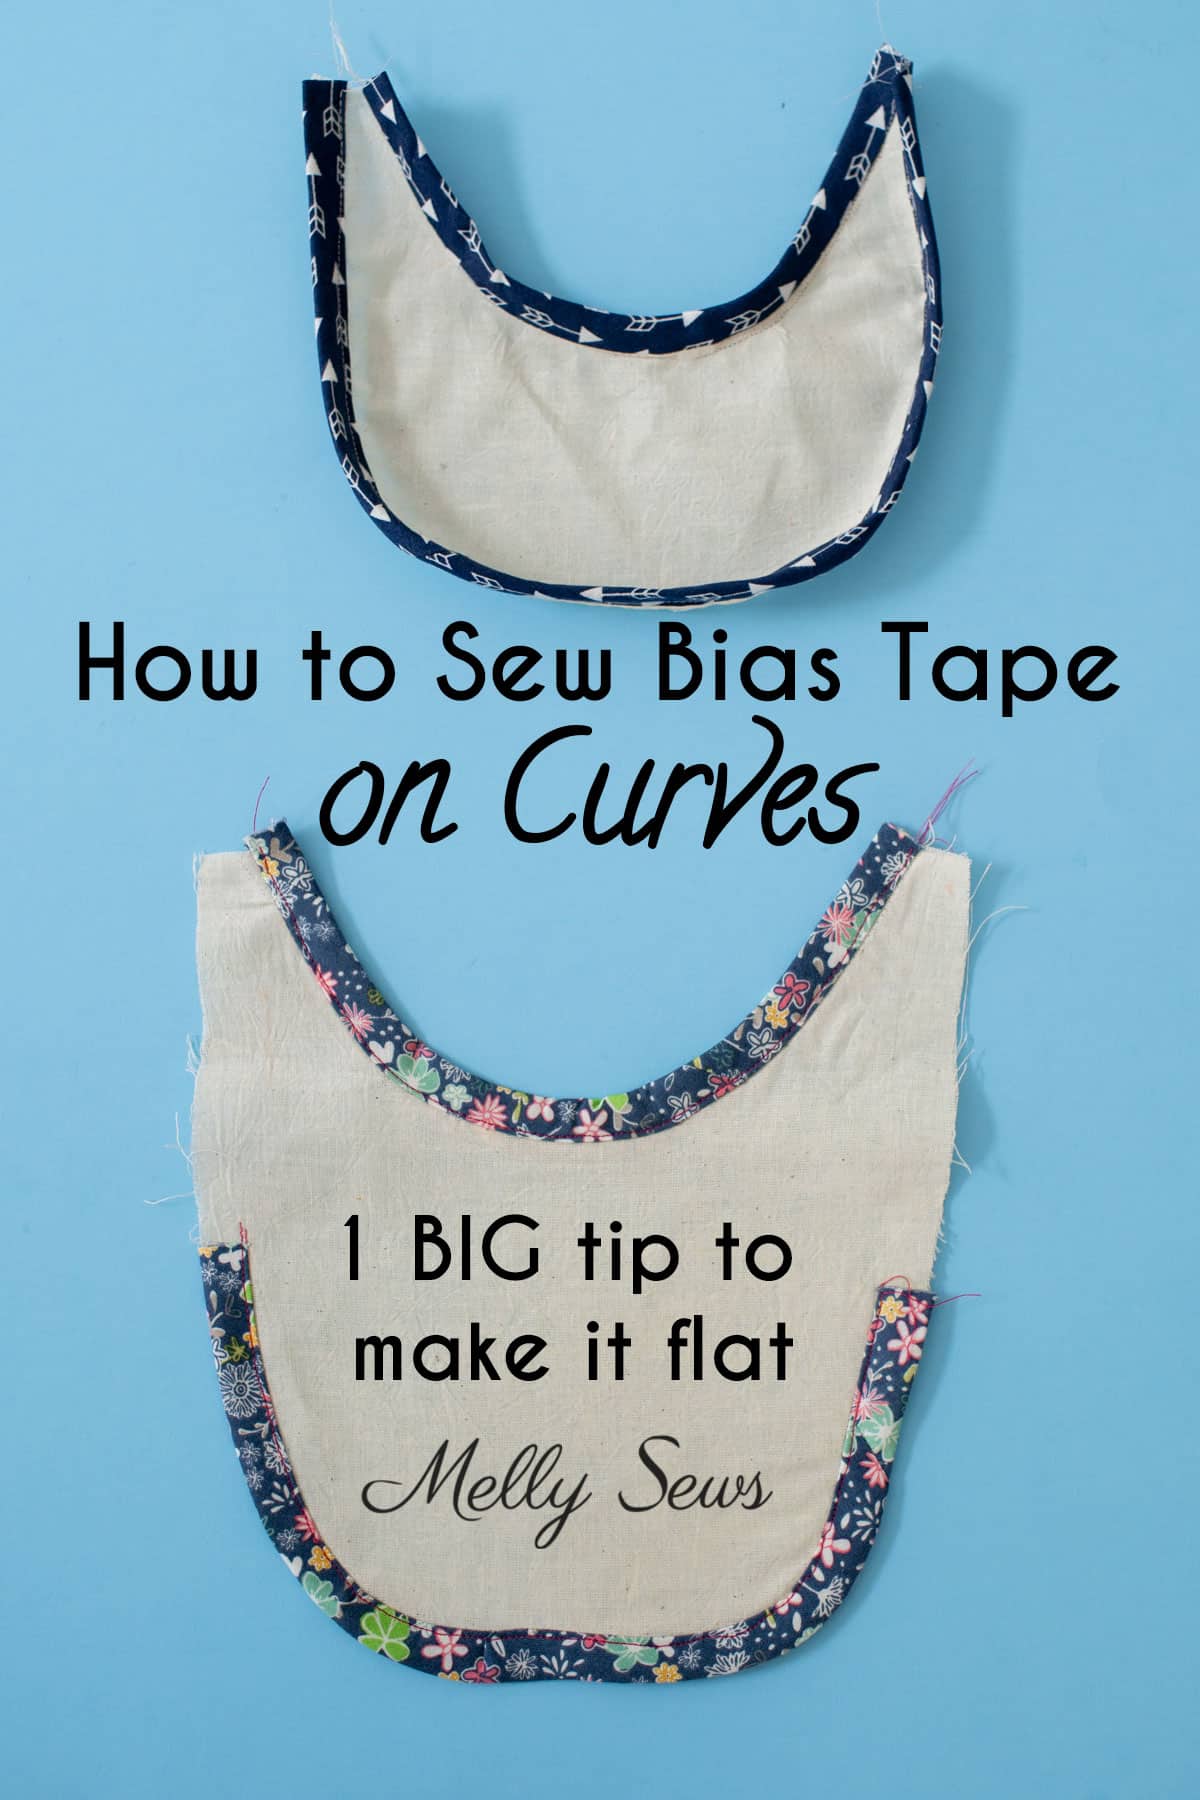 Use Stay Tape to Stabilize a Foldover Neckline Finish - Threads